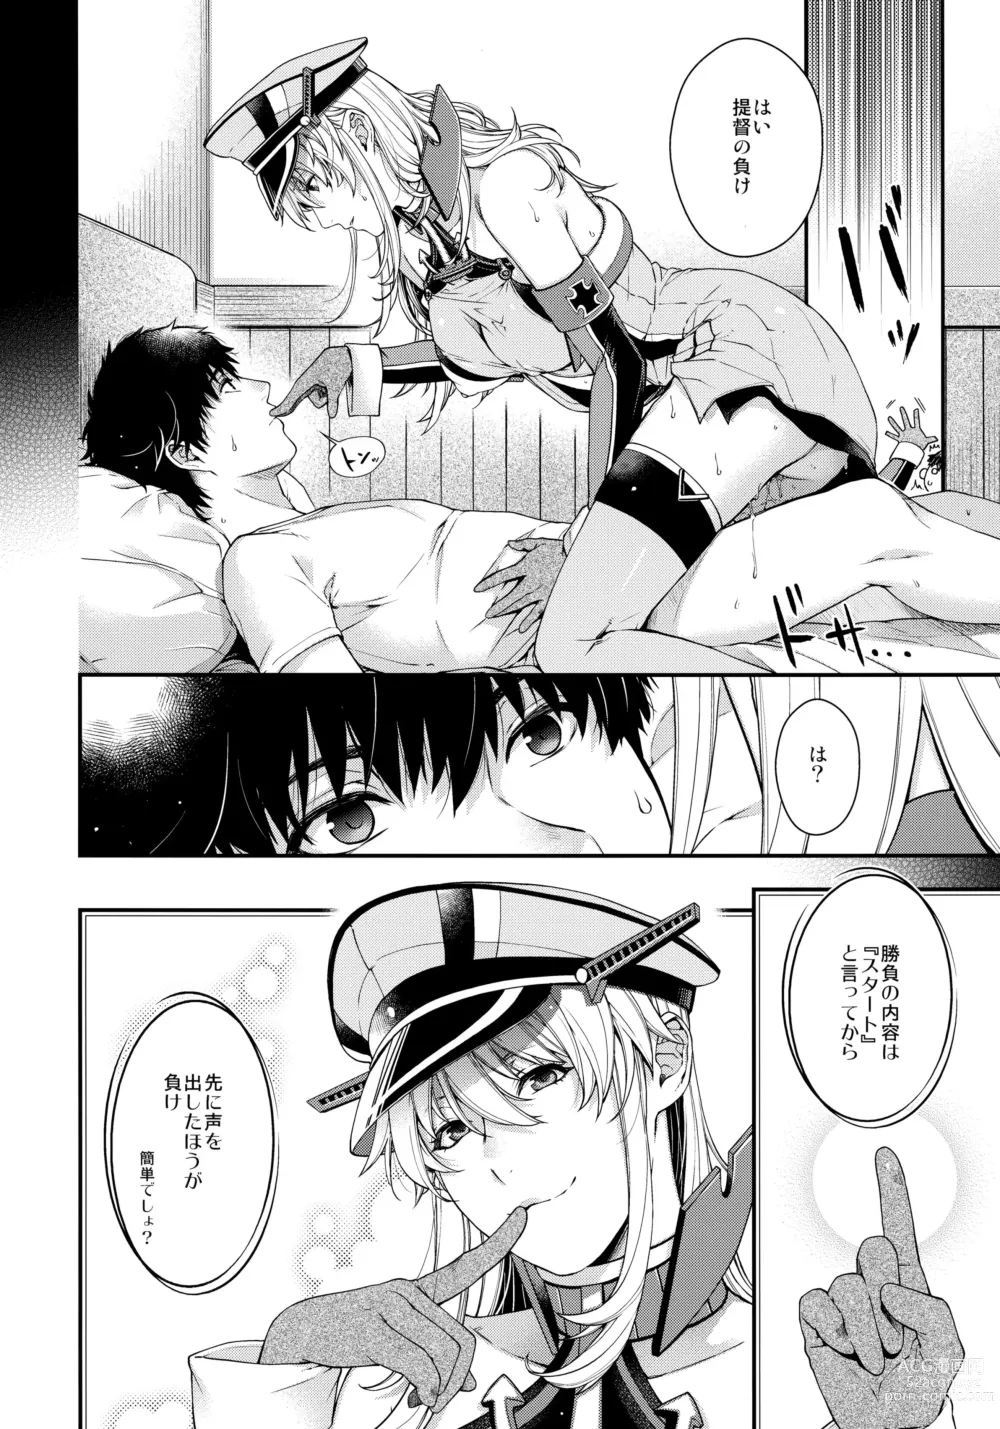 Page 14 of doujinshi Admiral! quiet